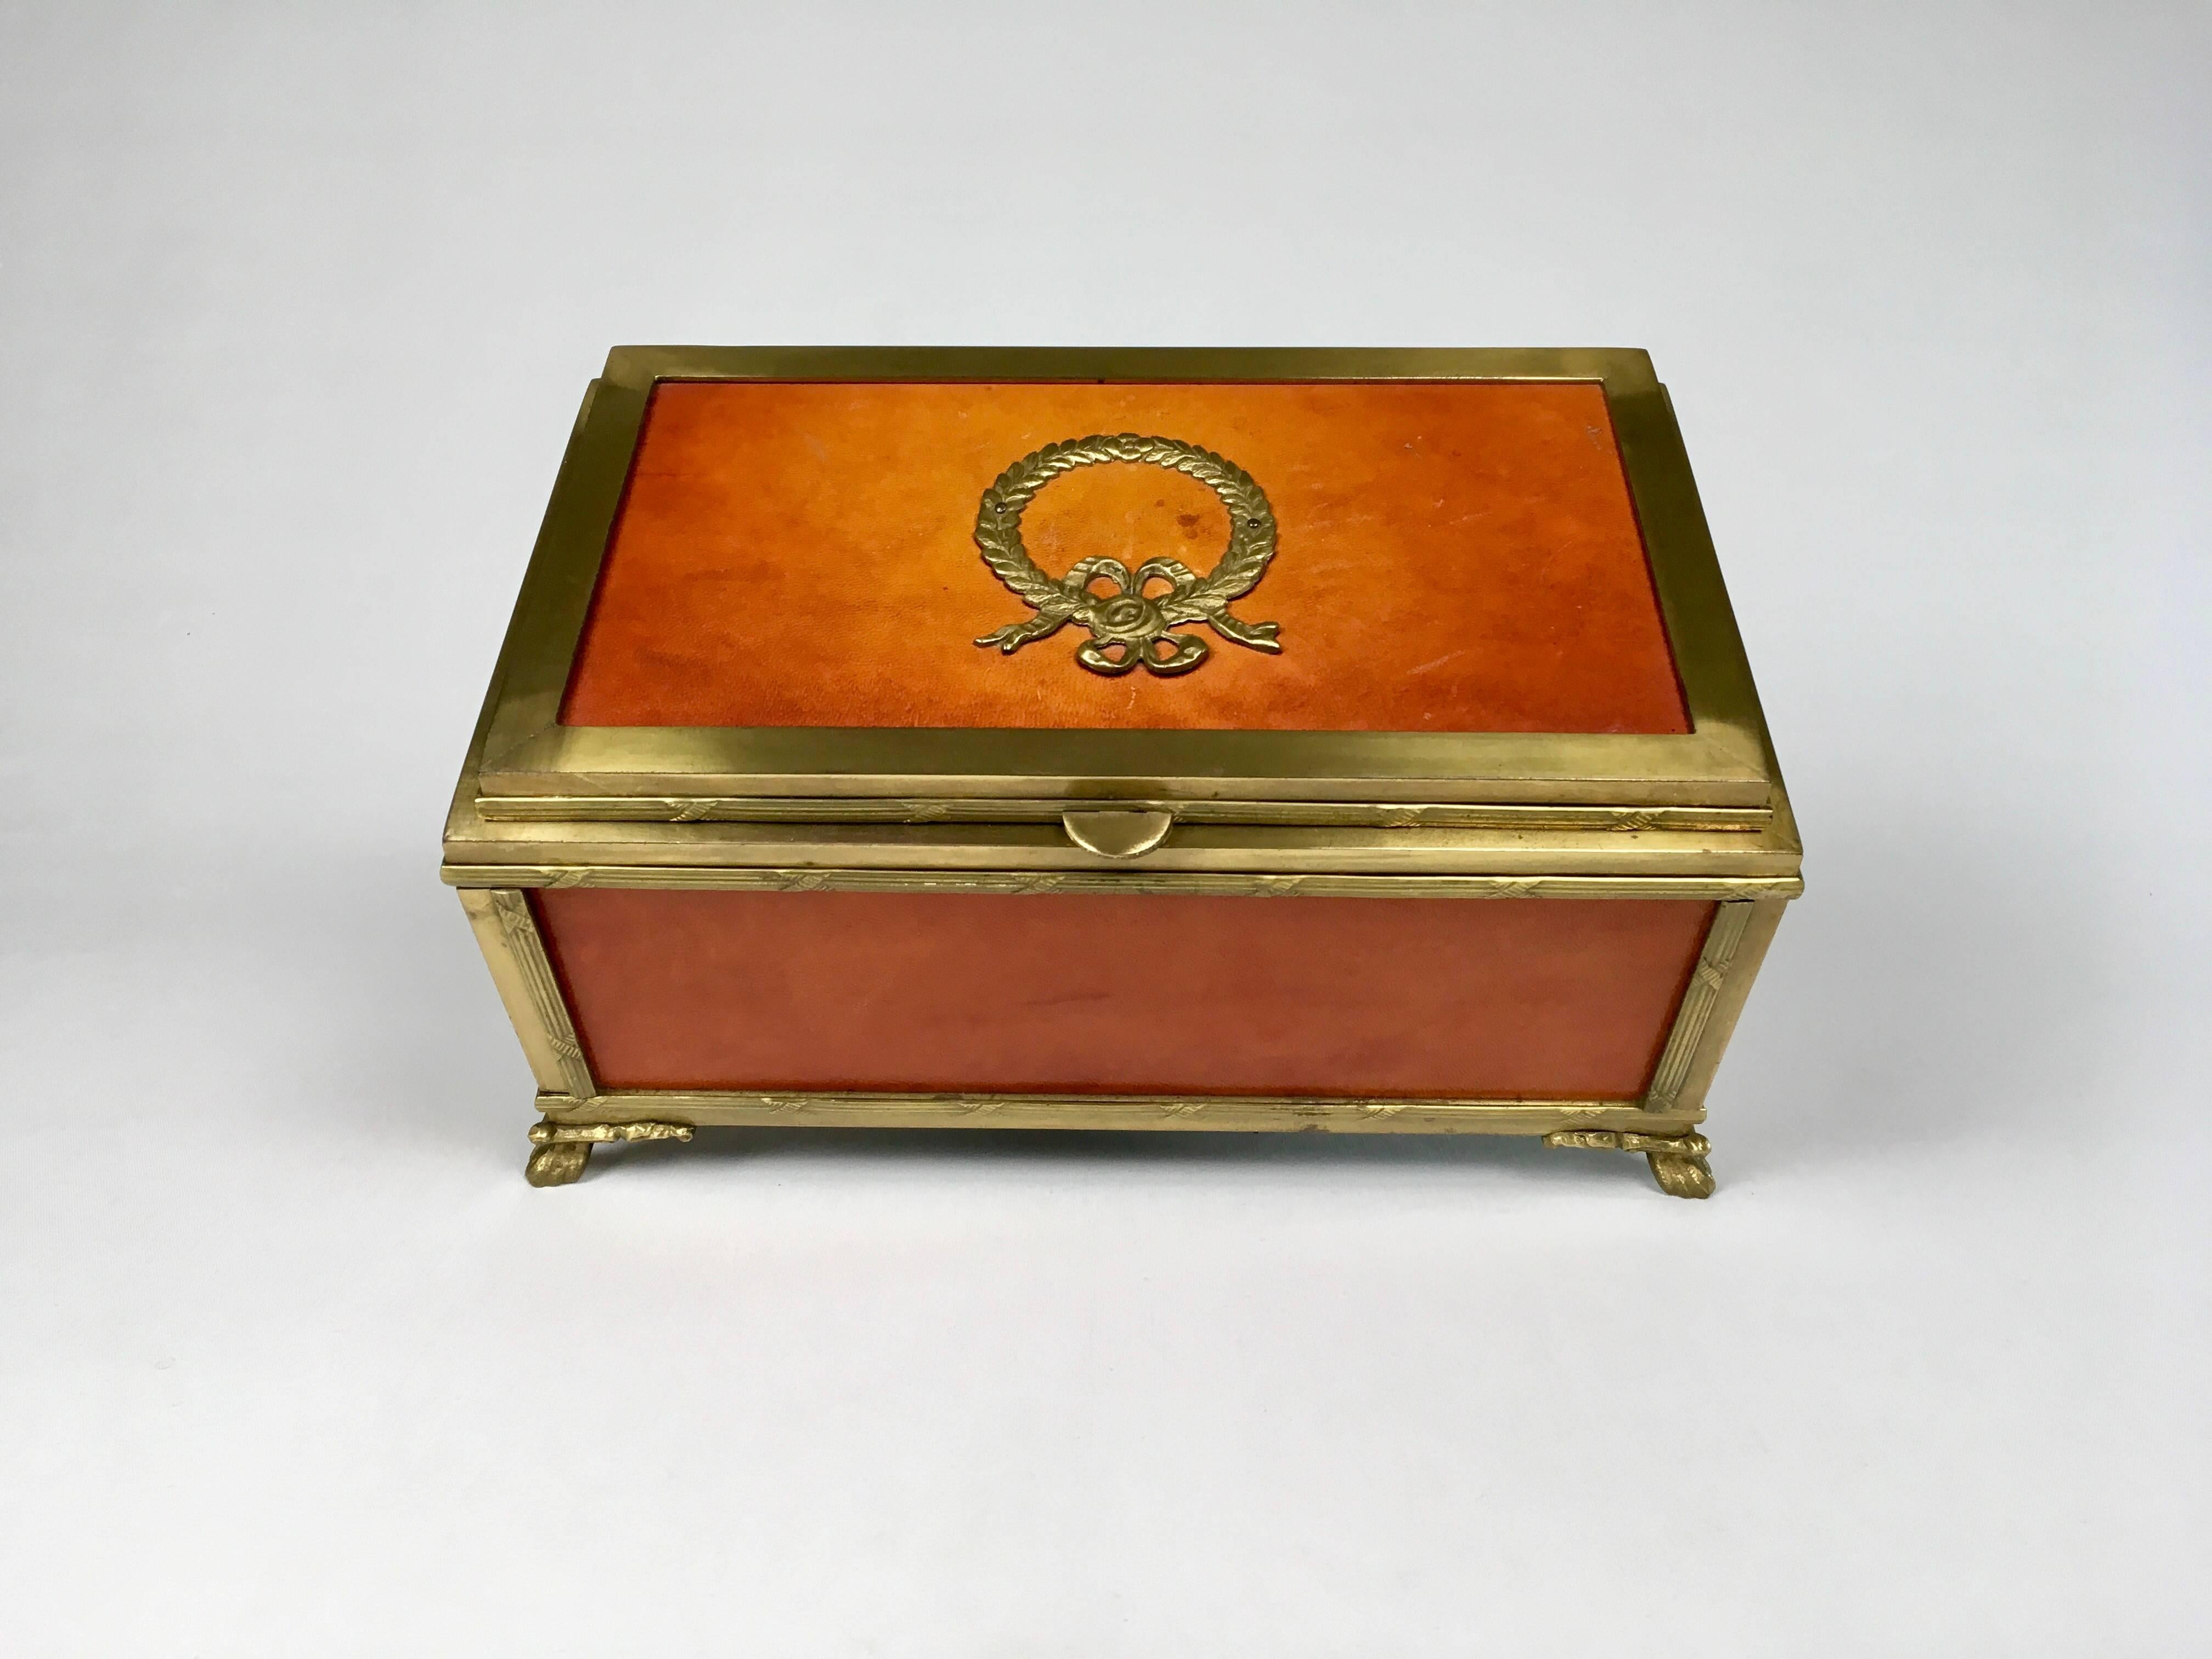 A French Napoleon brass and leather Box. French flair, made in Italy. Inside is lined in original dark brown felt. Heavy solid brass.